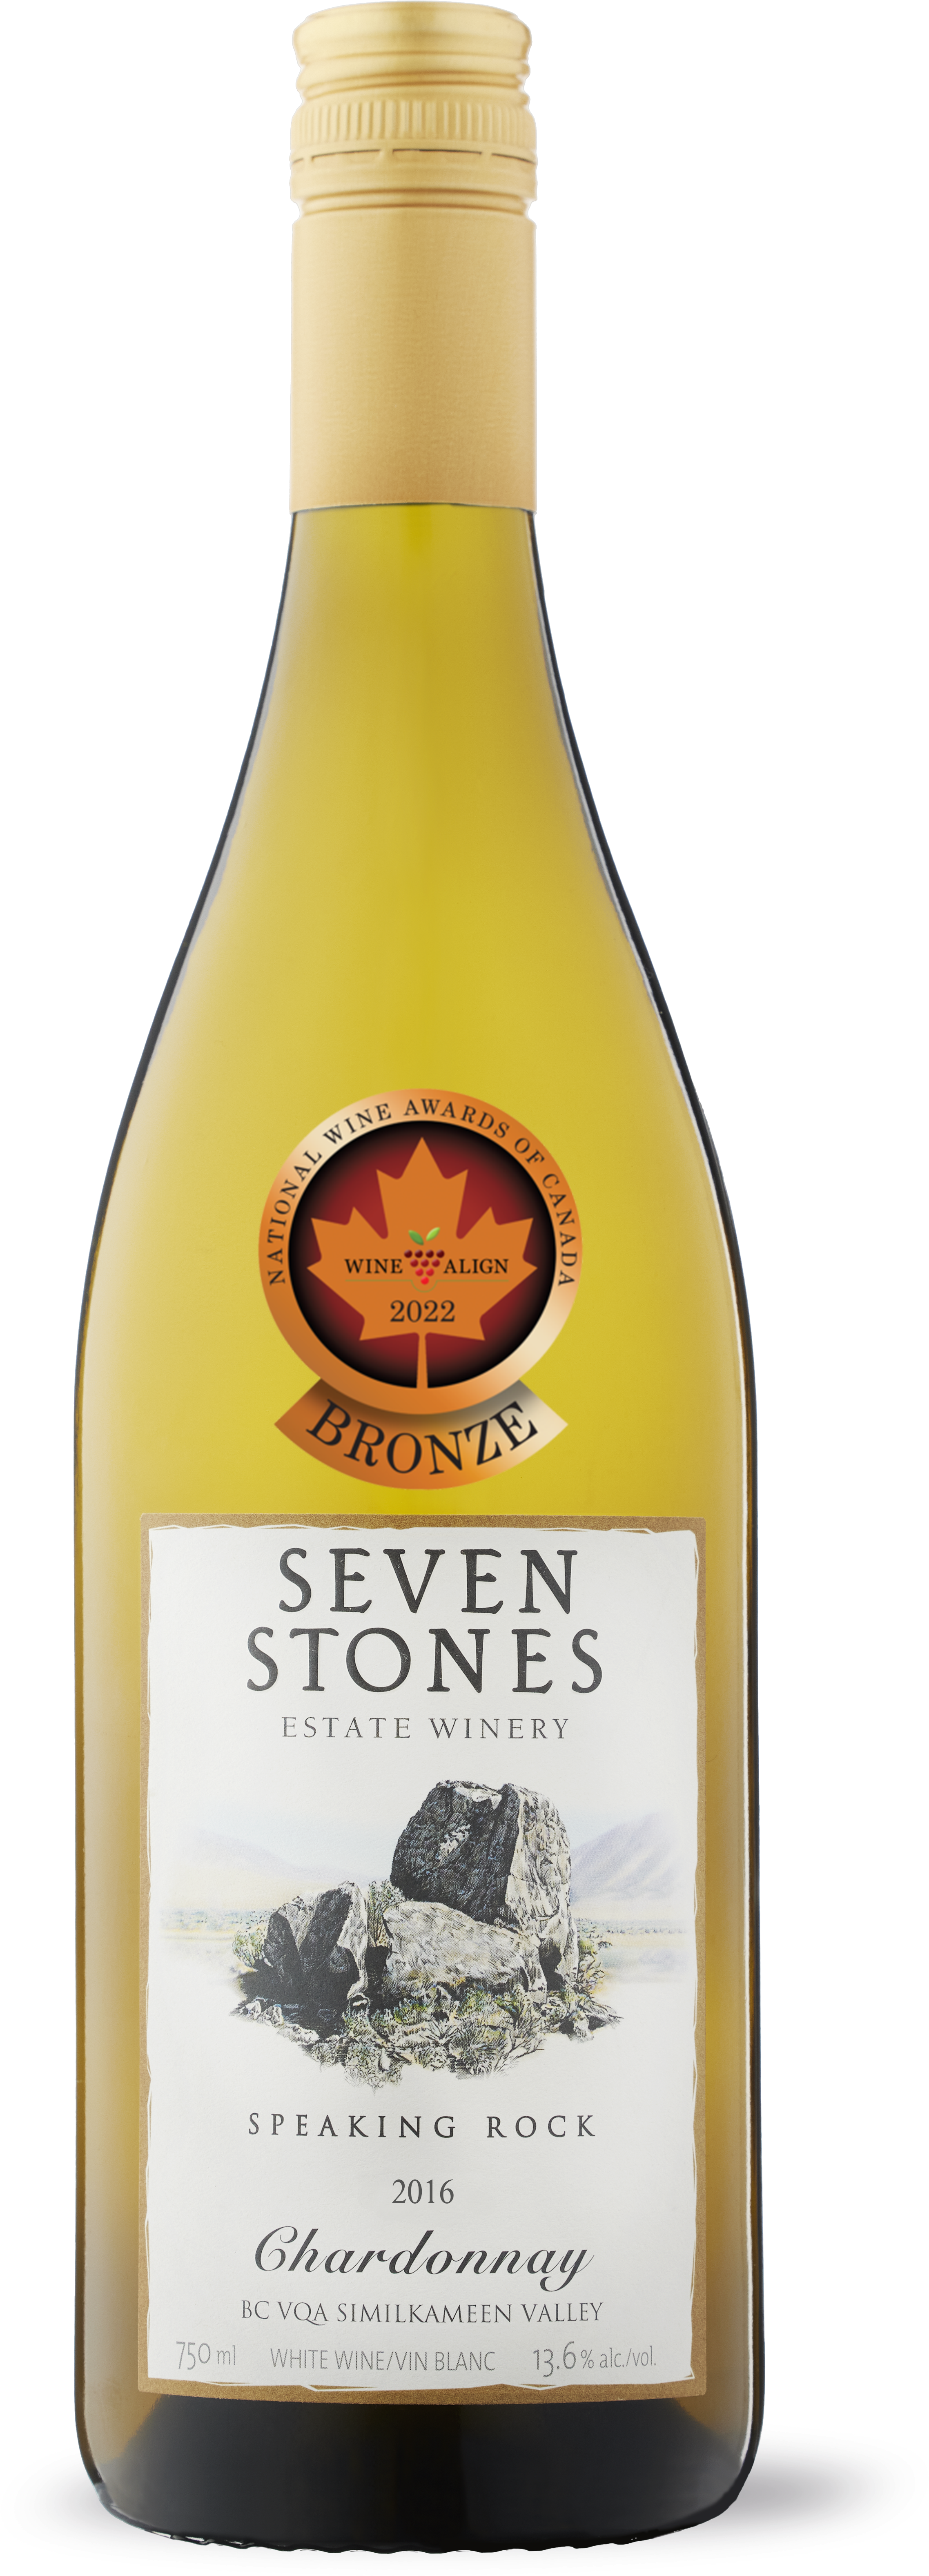 Product Image for 2016 Speaking Rock Chardonnay